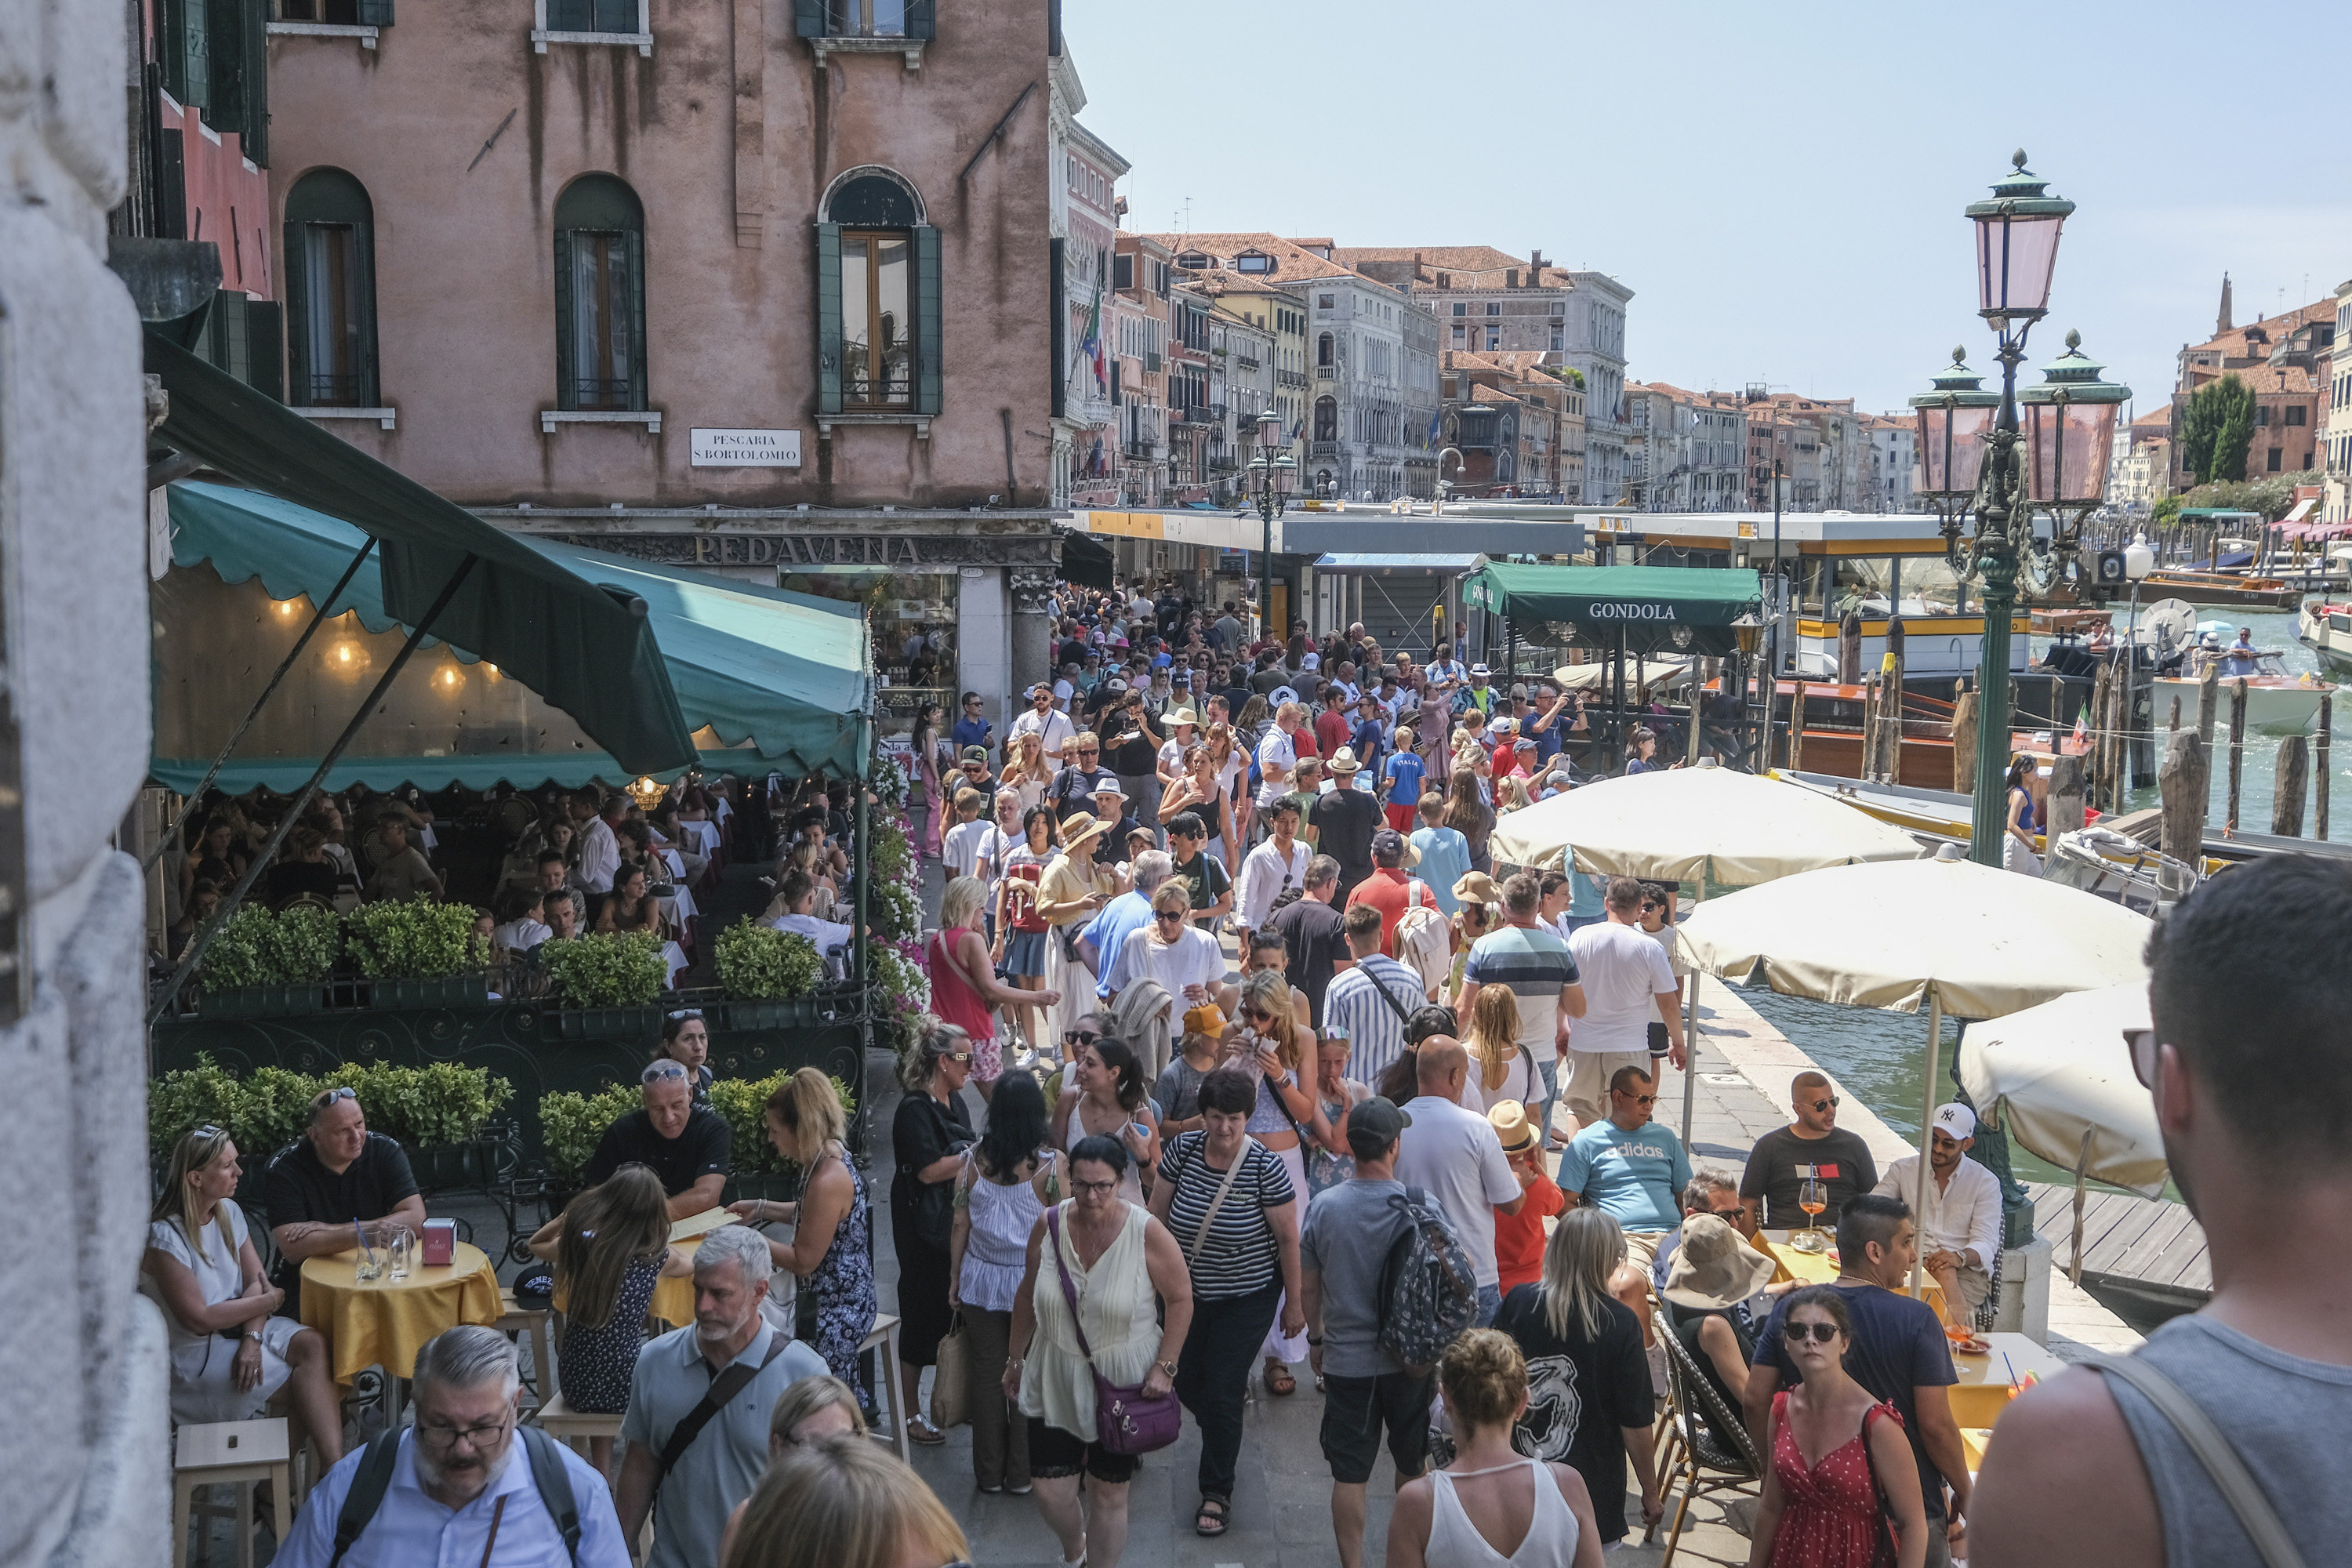 Tourists crowd the area near the Rialto Bridge in Venice on a day in August 2023. The city council has approved guidelines for trials of a new entry fee in 2024 for day trippers visiting the city. Photo: Getty Images